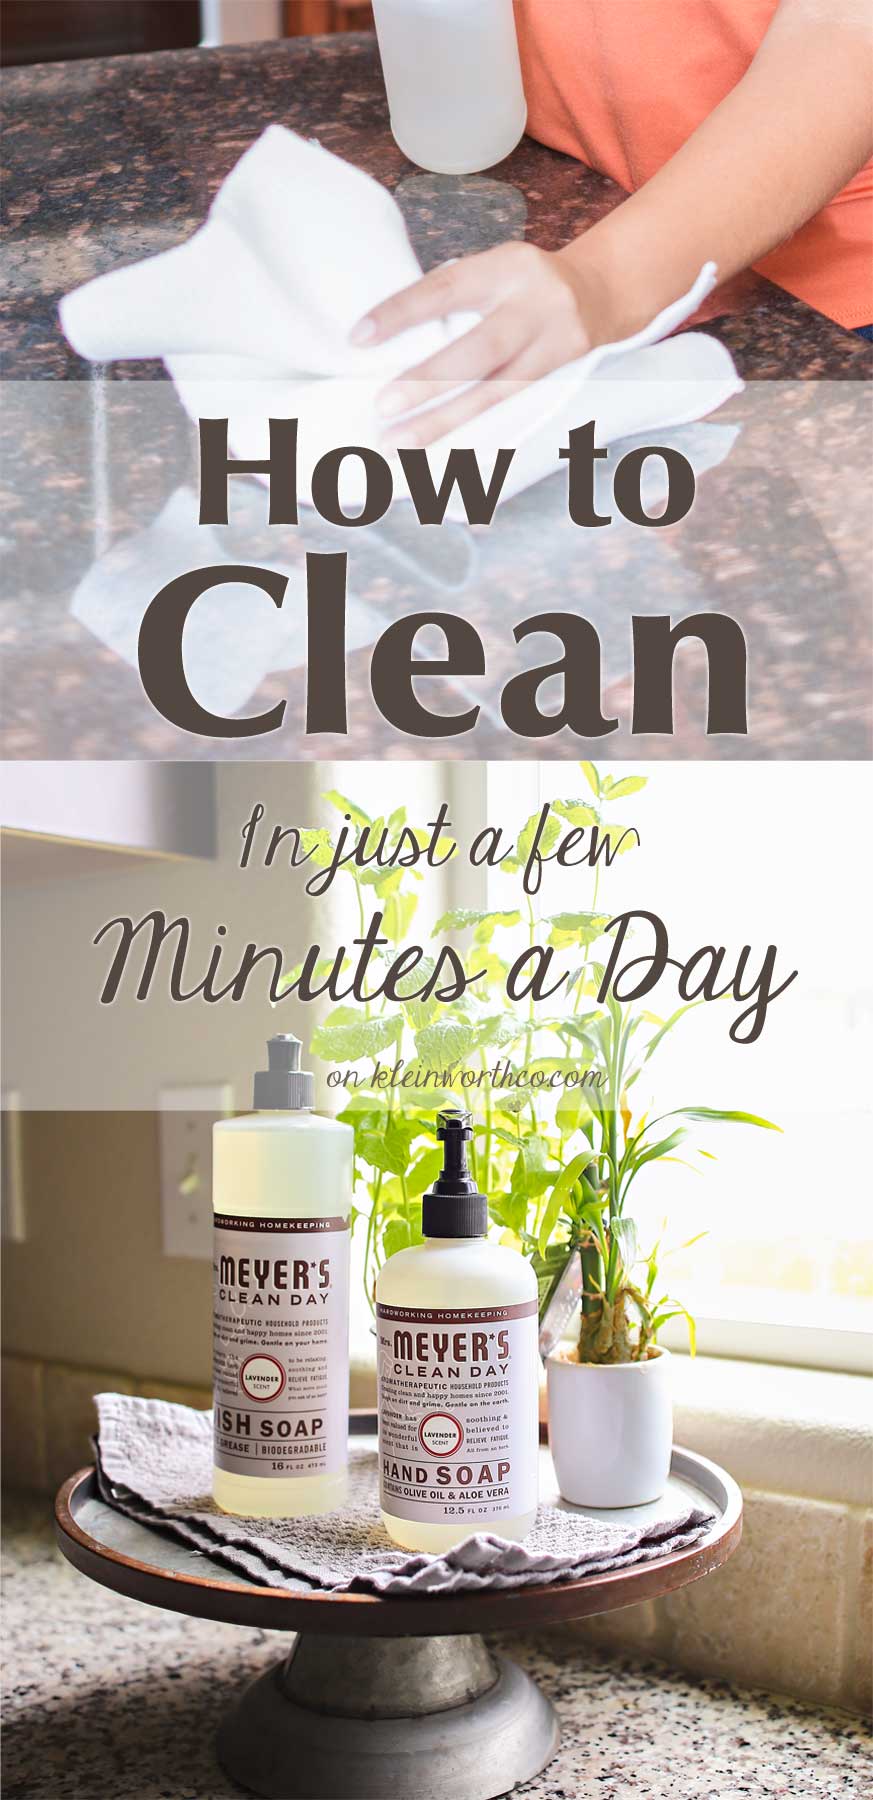 How to Clean in Just a Few Minutes a Day with these helpful tips. You CAN have a sparkling home with little time & effort if you have a plan & stick to it. Check out how I do it, even with 3 kids & 3 pets in the house.